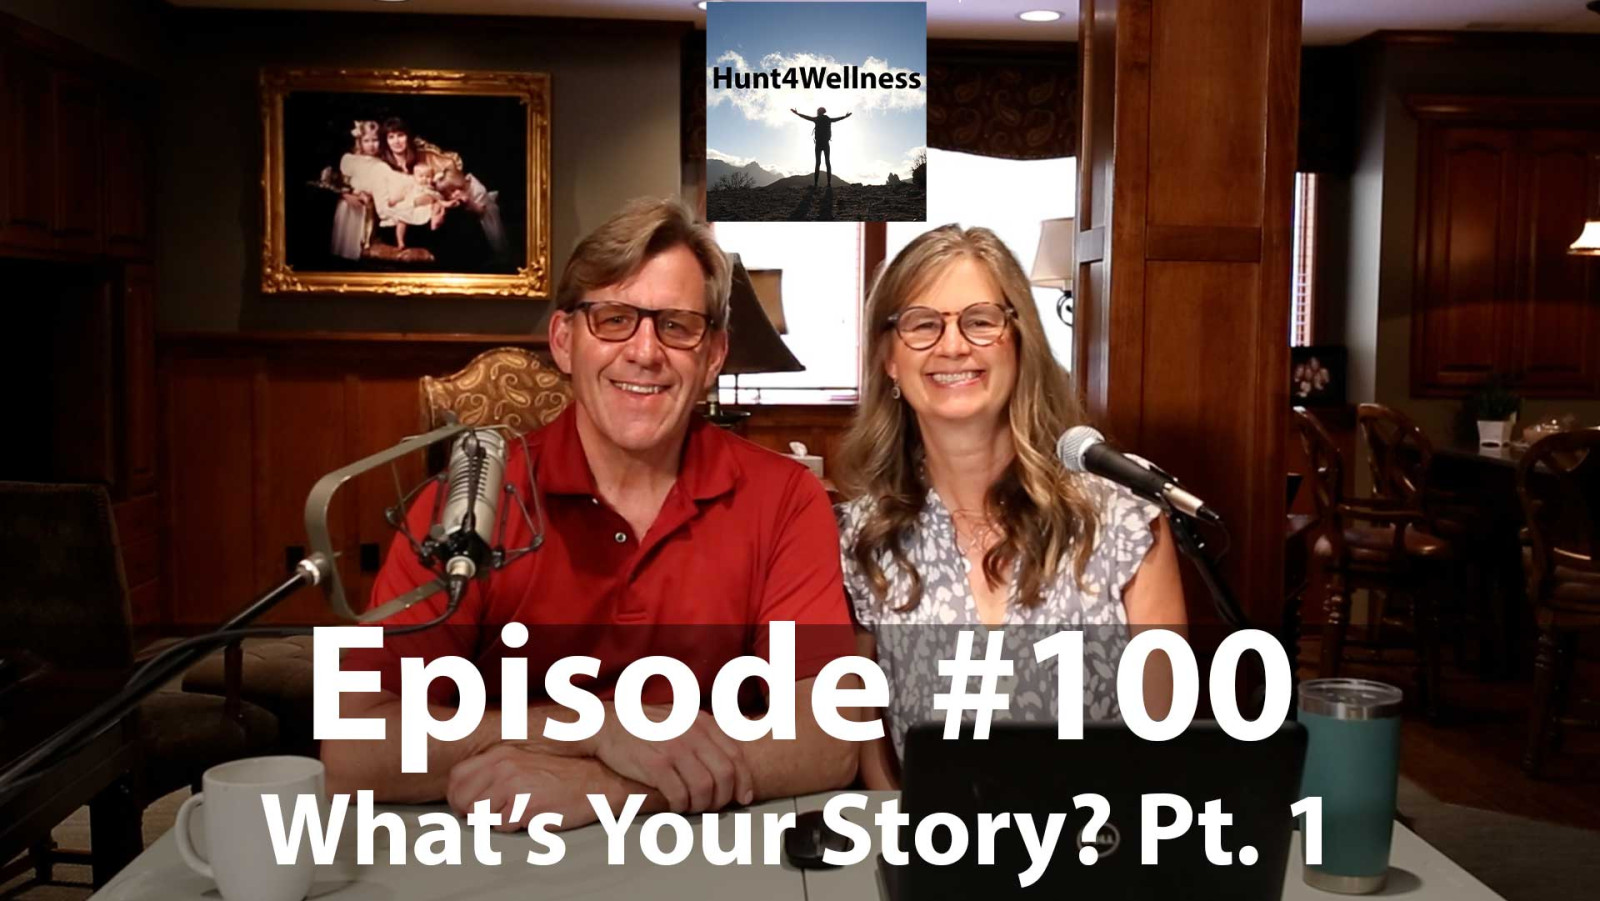 Episode #100 - What's Your Story? Pt. 1